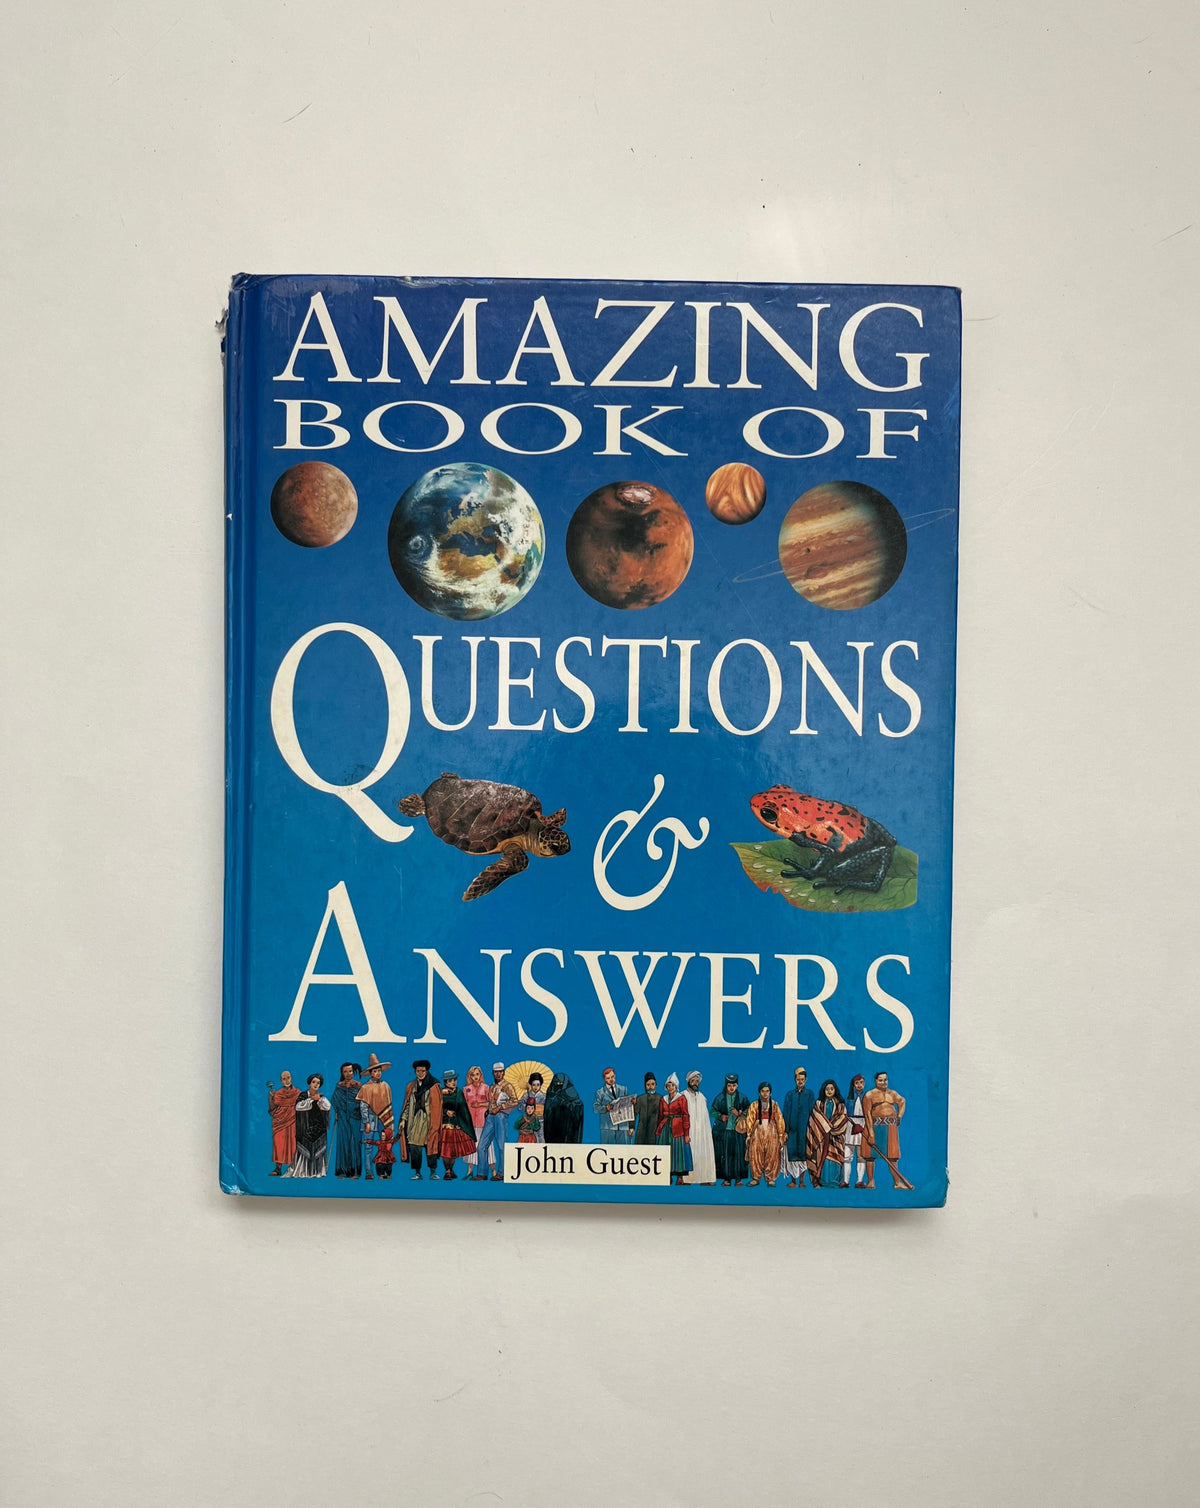 Amazing Book of Questions &amp; Answers by John Guest